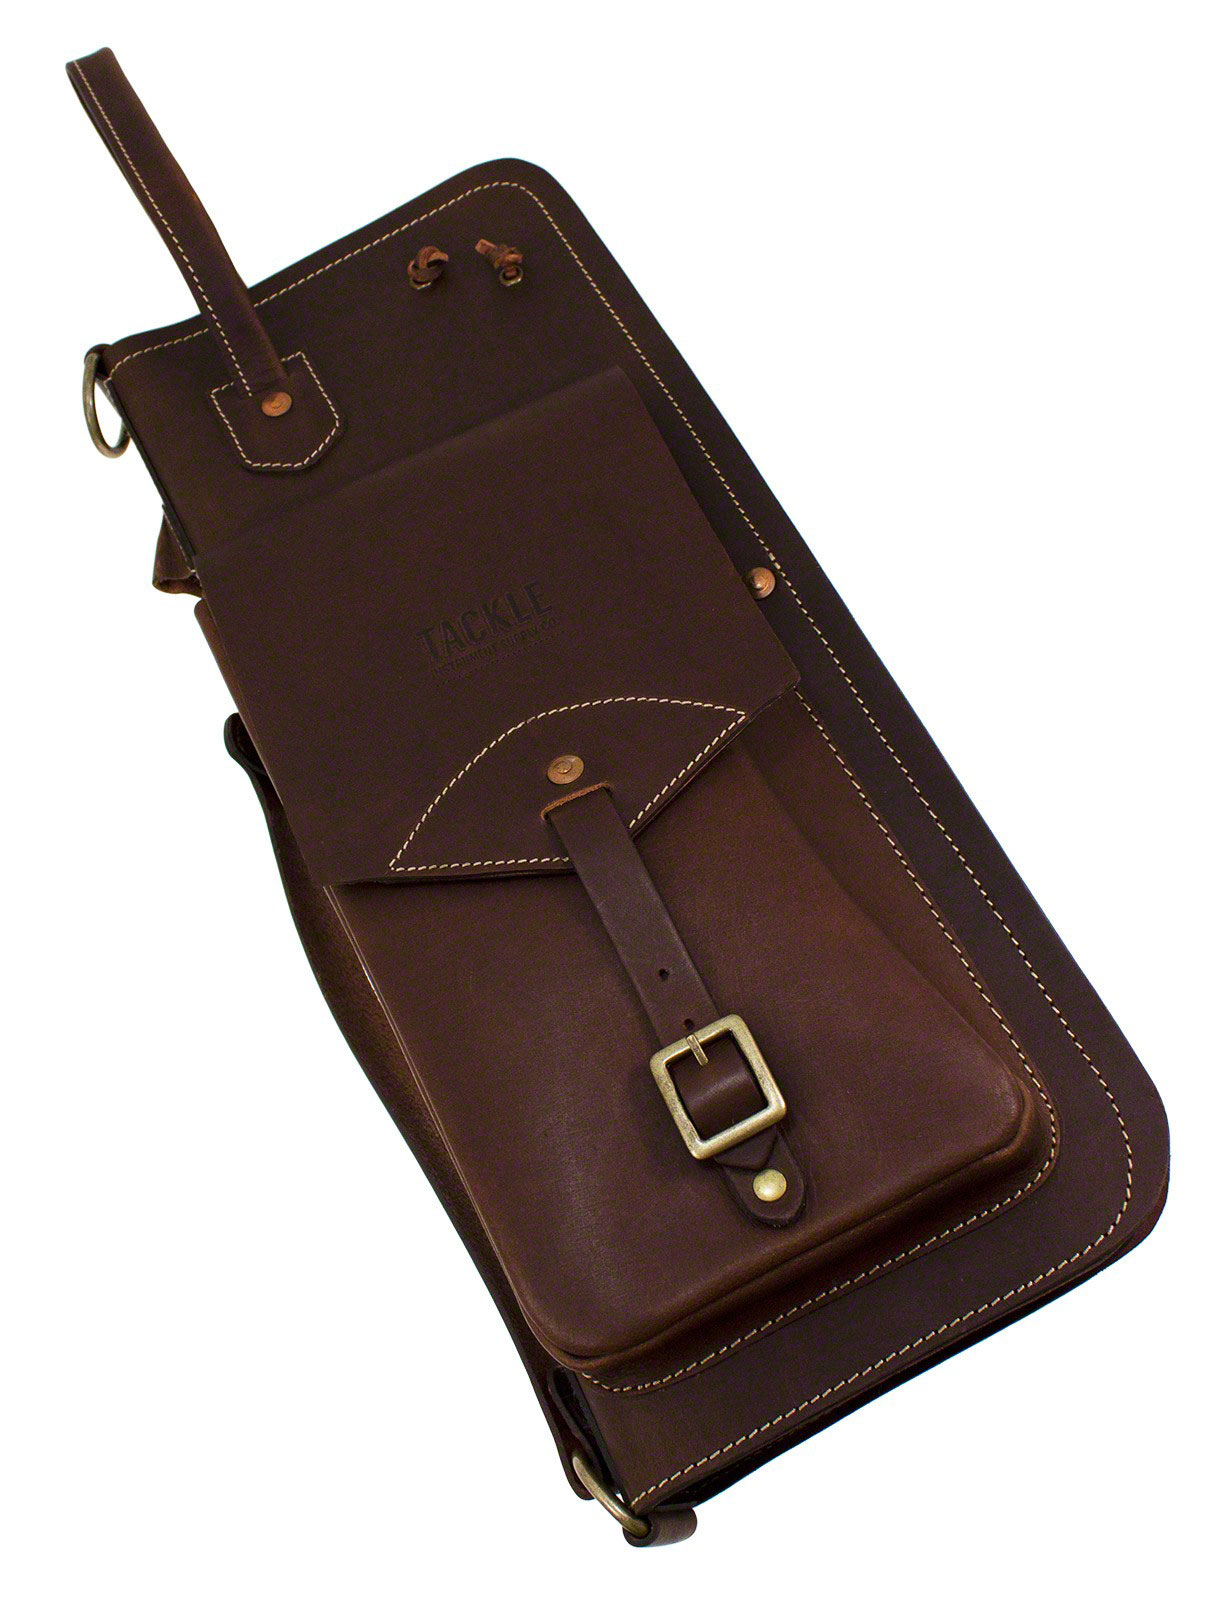 TACKLE INSTRUMENTS LEATHER STICK CASE - BROWN